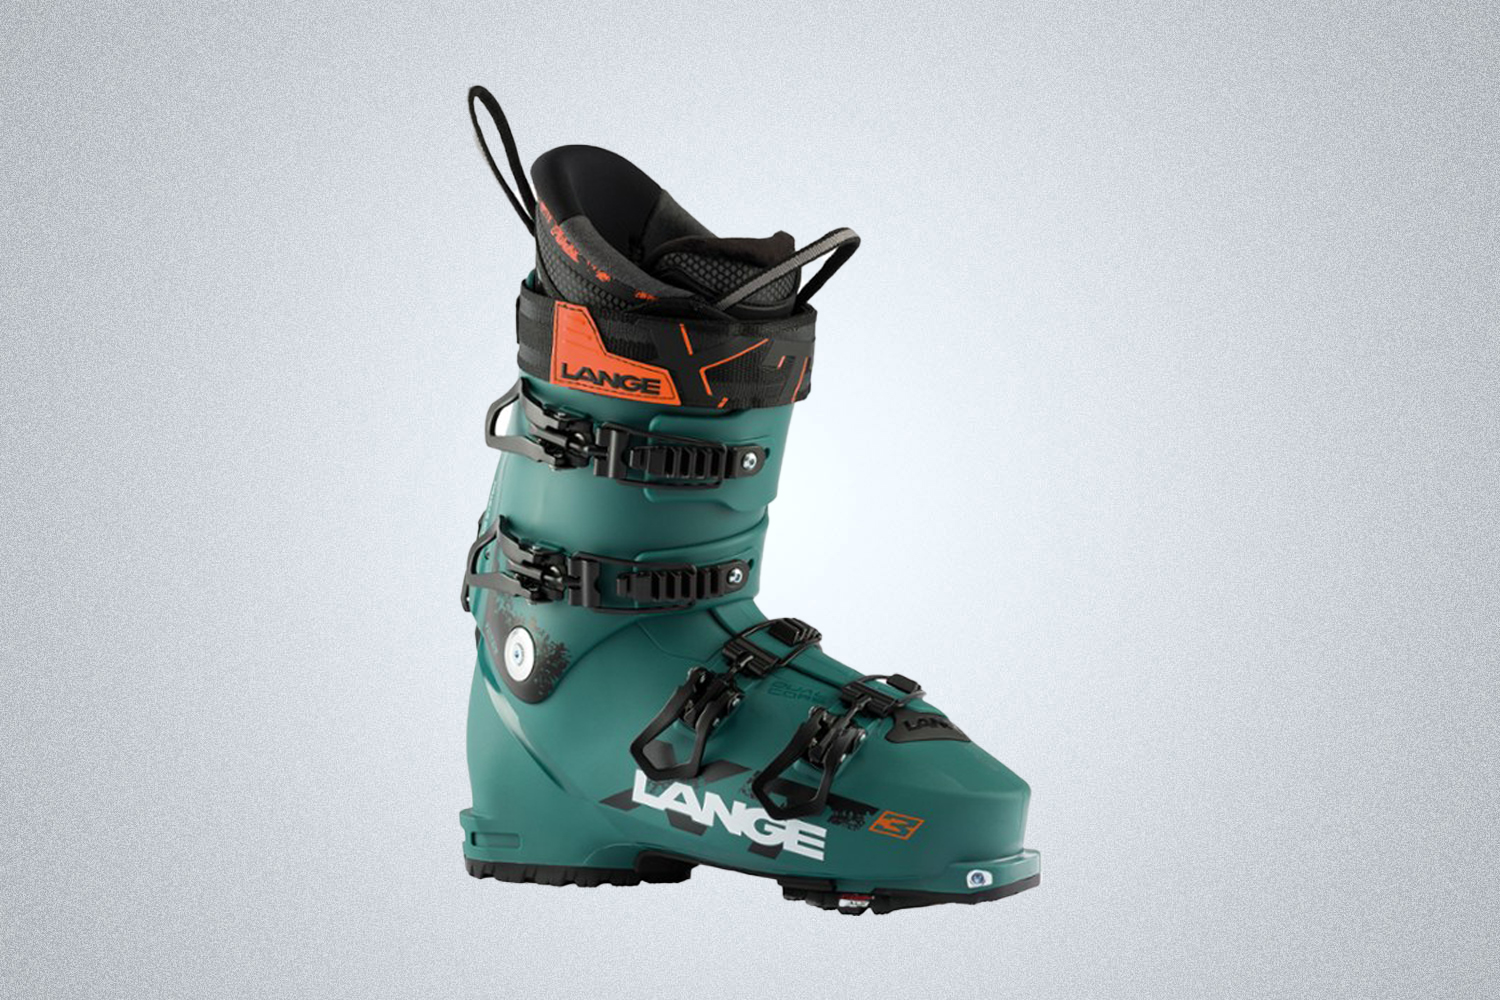 The Lange XT3 Touring Ski Boots is perfect for all-mountain adventures in 2022